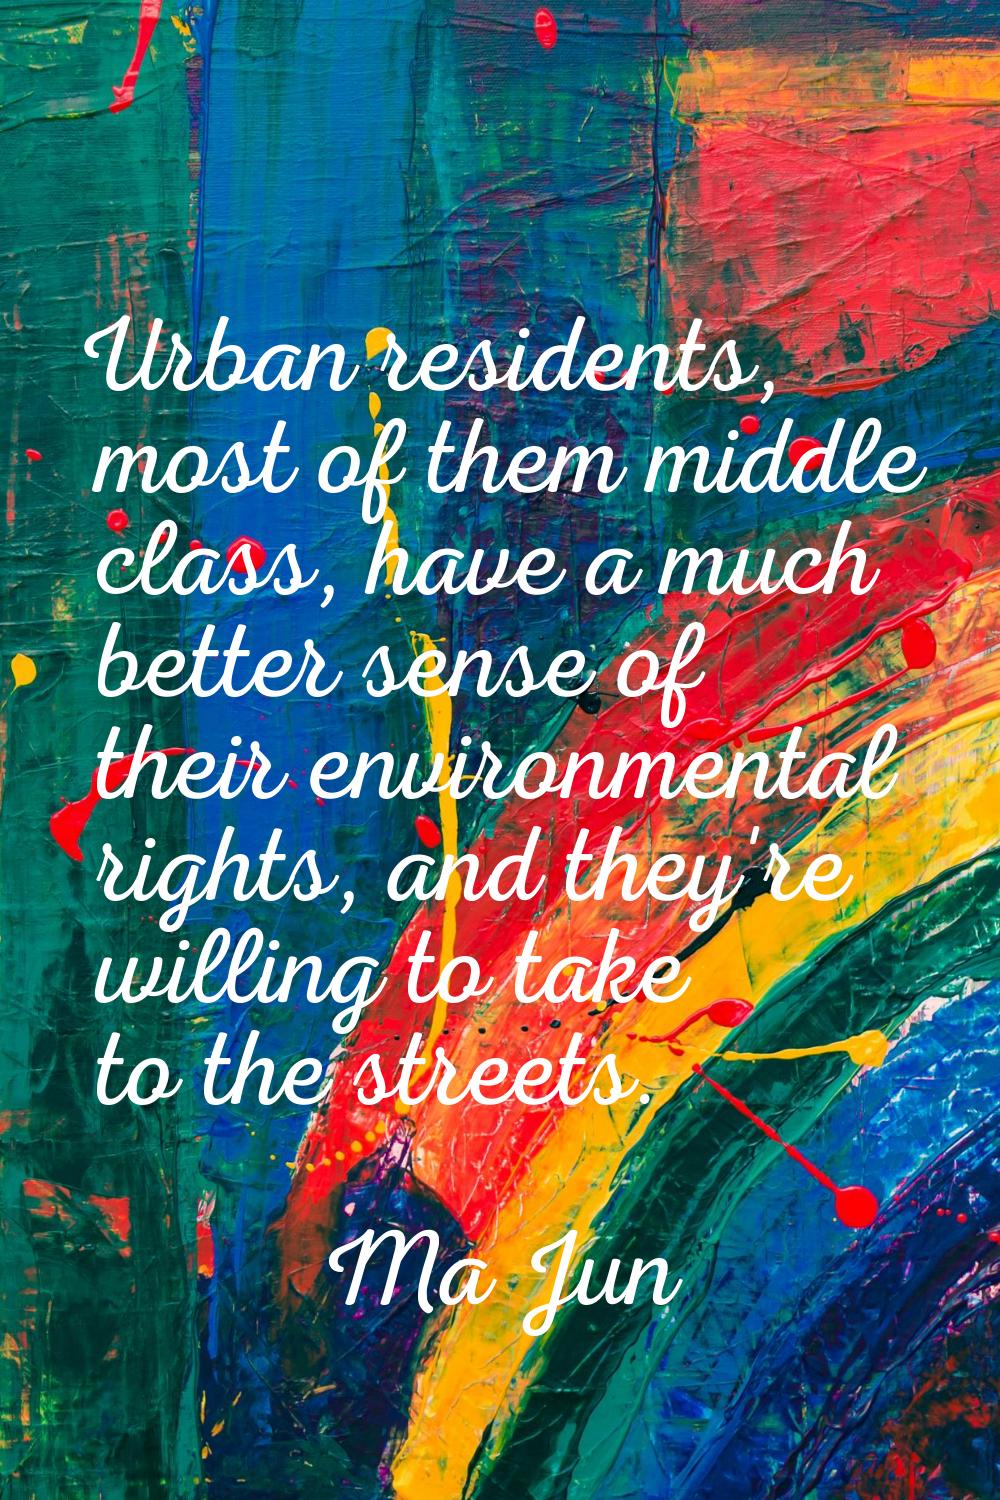 Urban residents, most of them middle class, have a much better sense of their environmental rights,